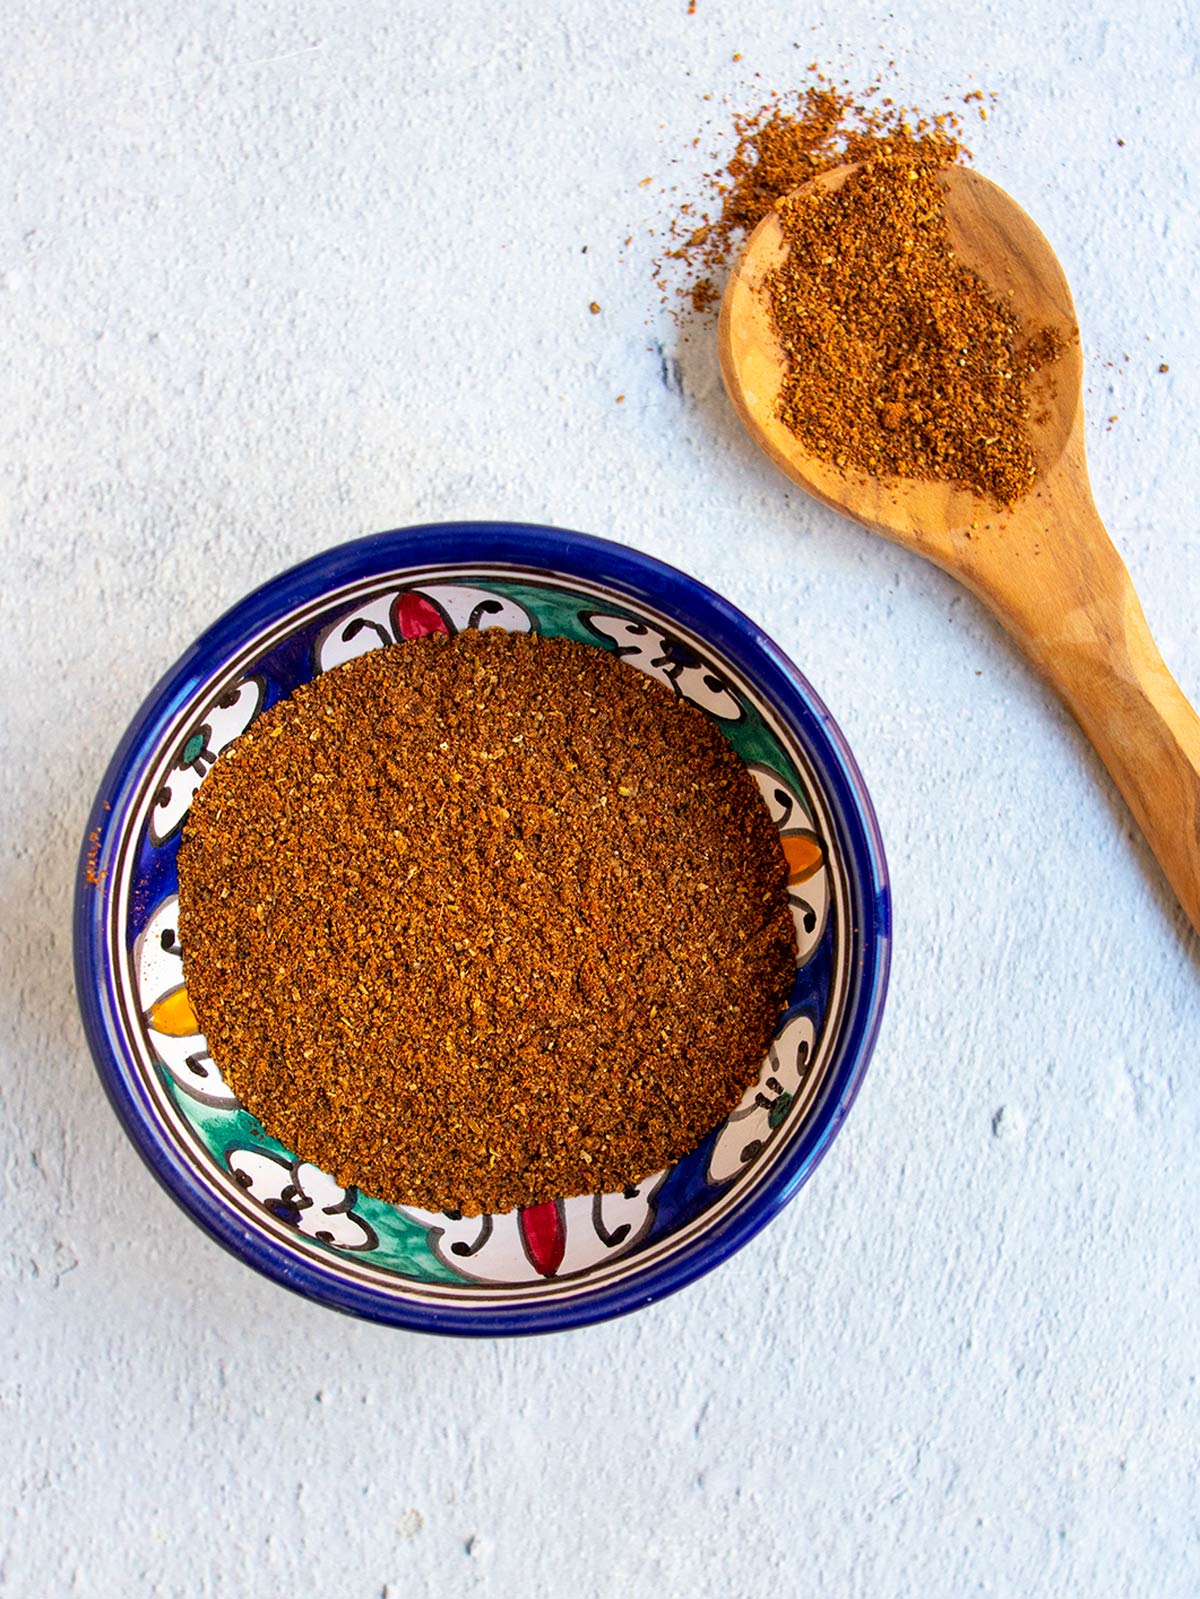 Mixed baharat spice mix in a blue